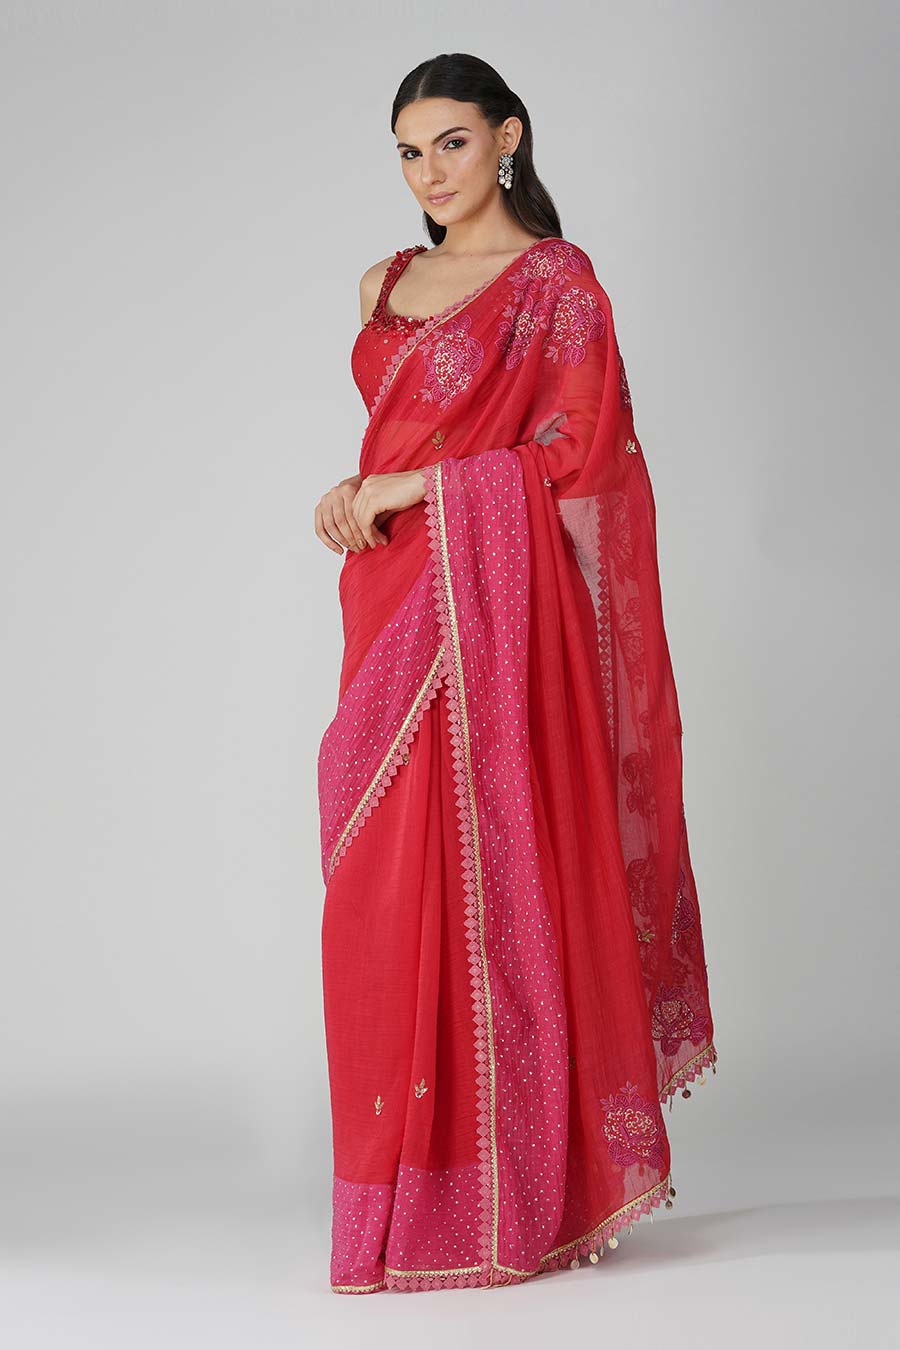 Red-Pink embroidered Saree Set